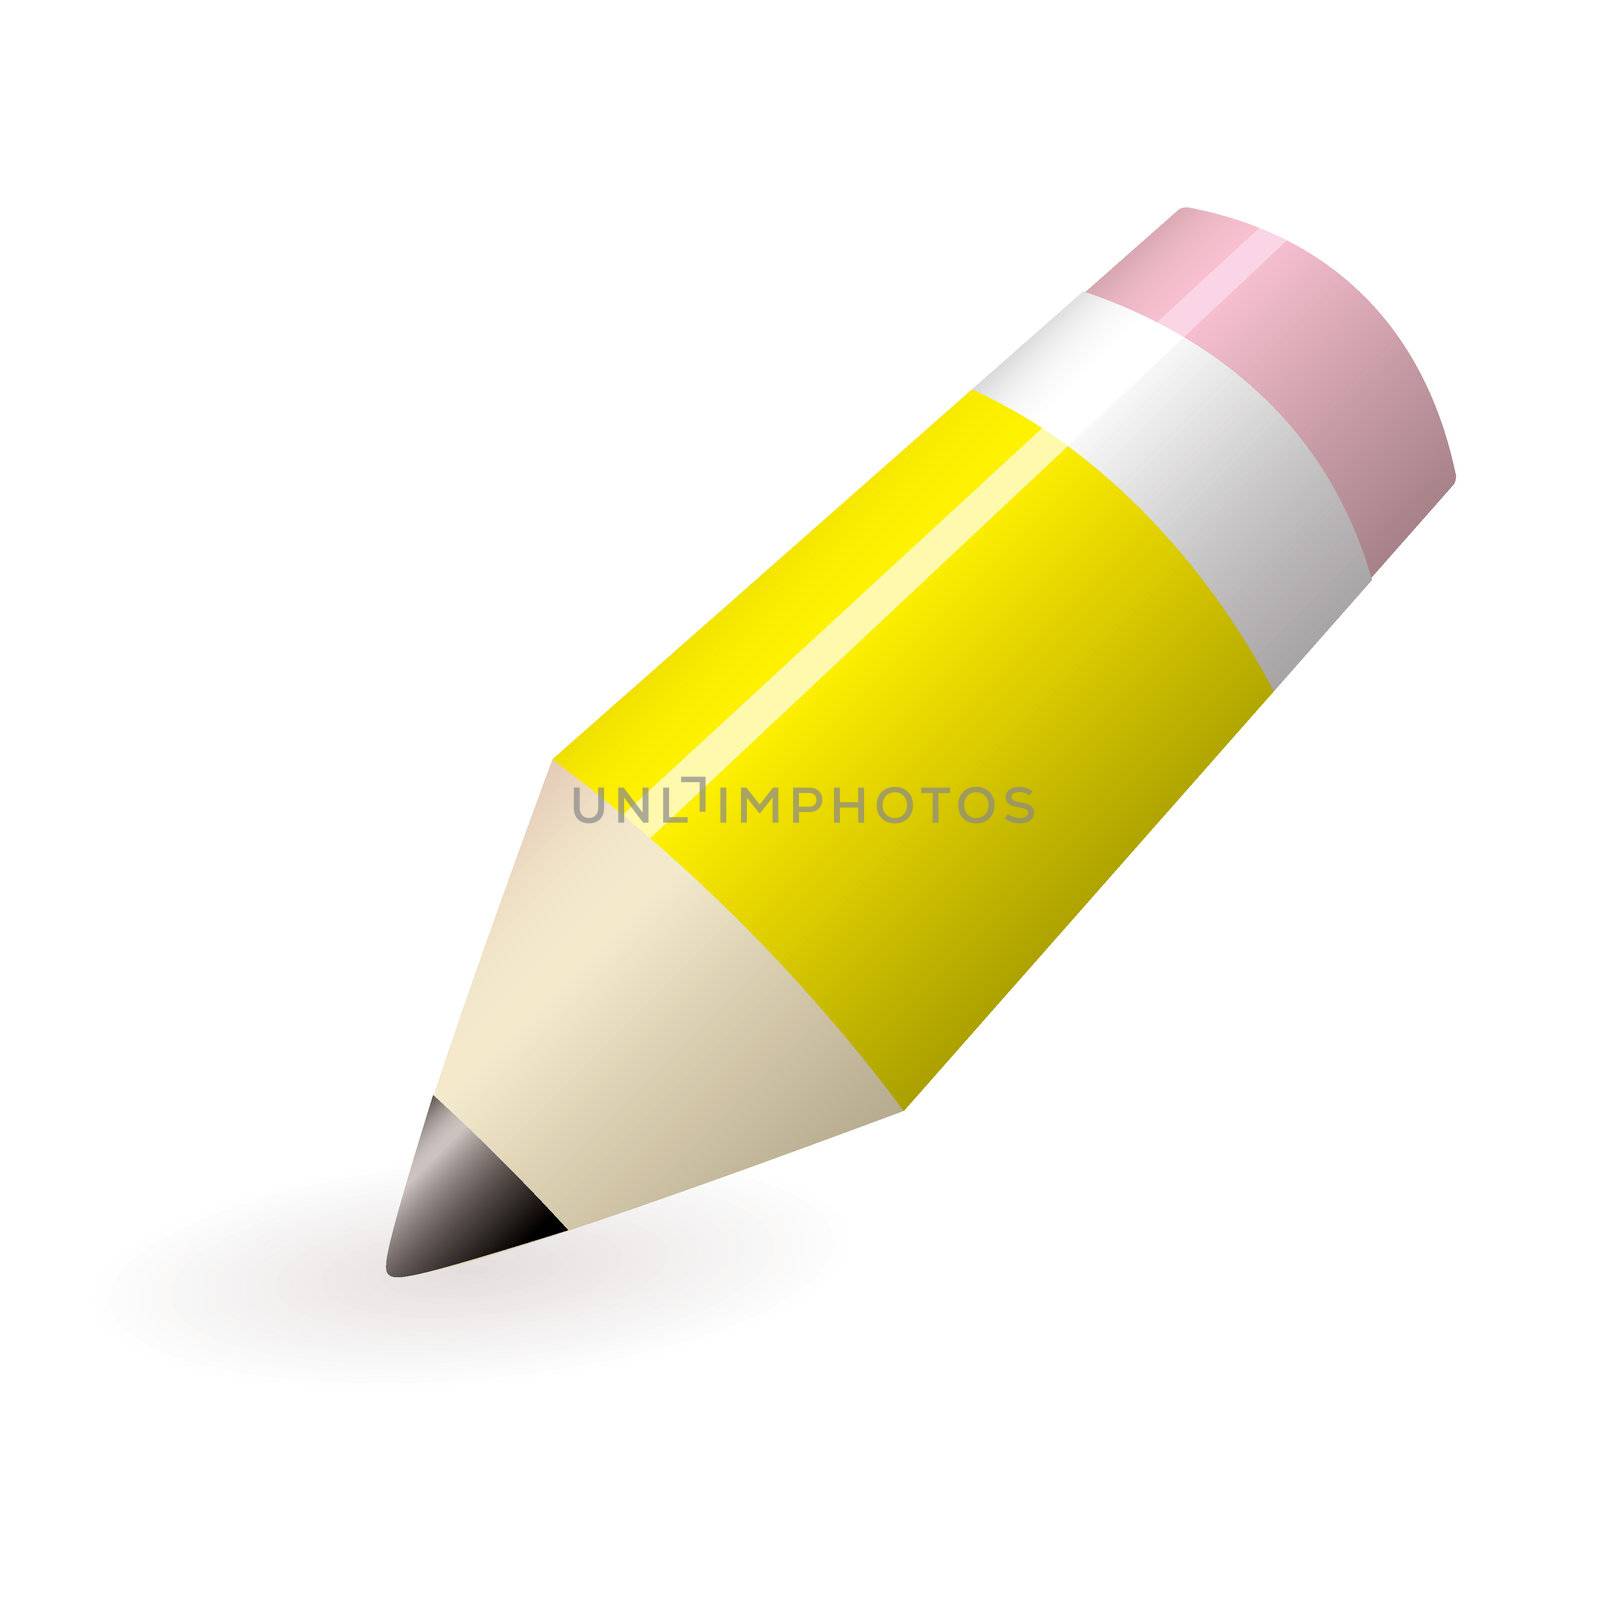 Yellow lead pencil with pink rubber and shadow